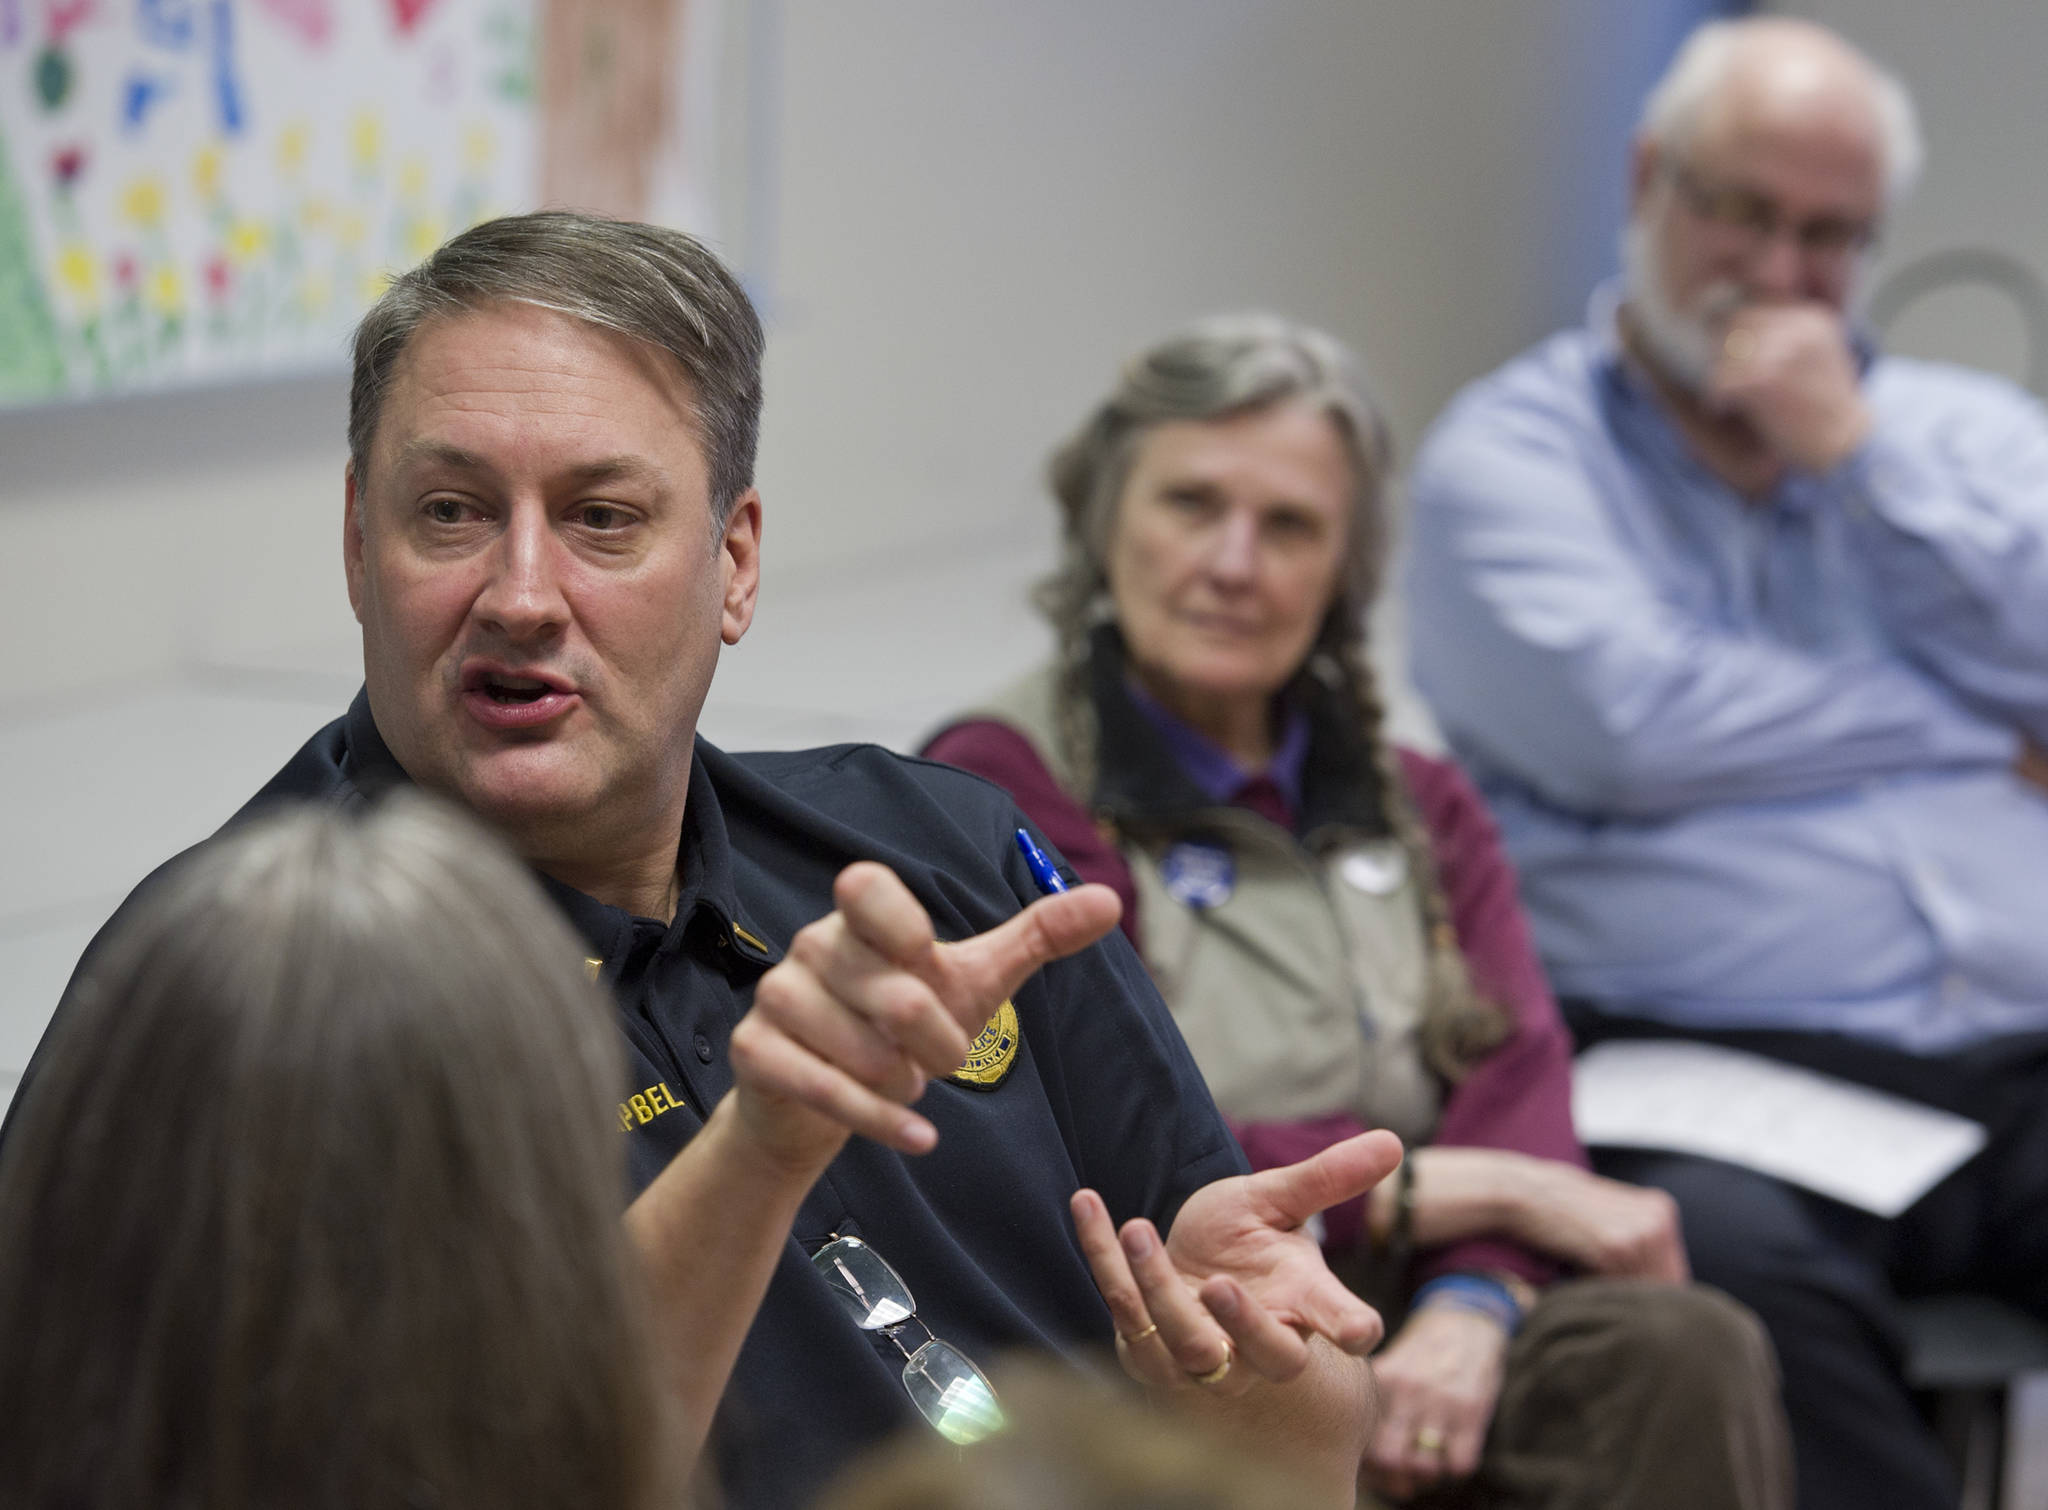 Juneau Police Department Lt. David Campbell speaks about residential safety and rising crime rates during a Douglas Island Neighbors Association meeting at the Douglas Public Library on Tuesday. (Michael Penn | Juneau Empire)